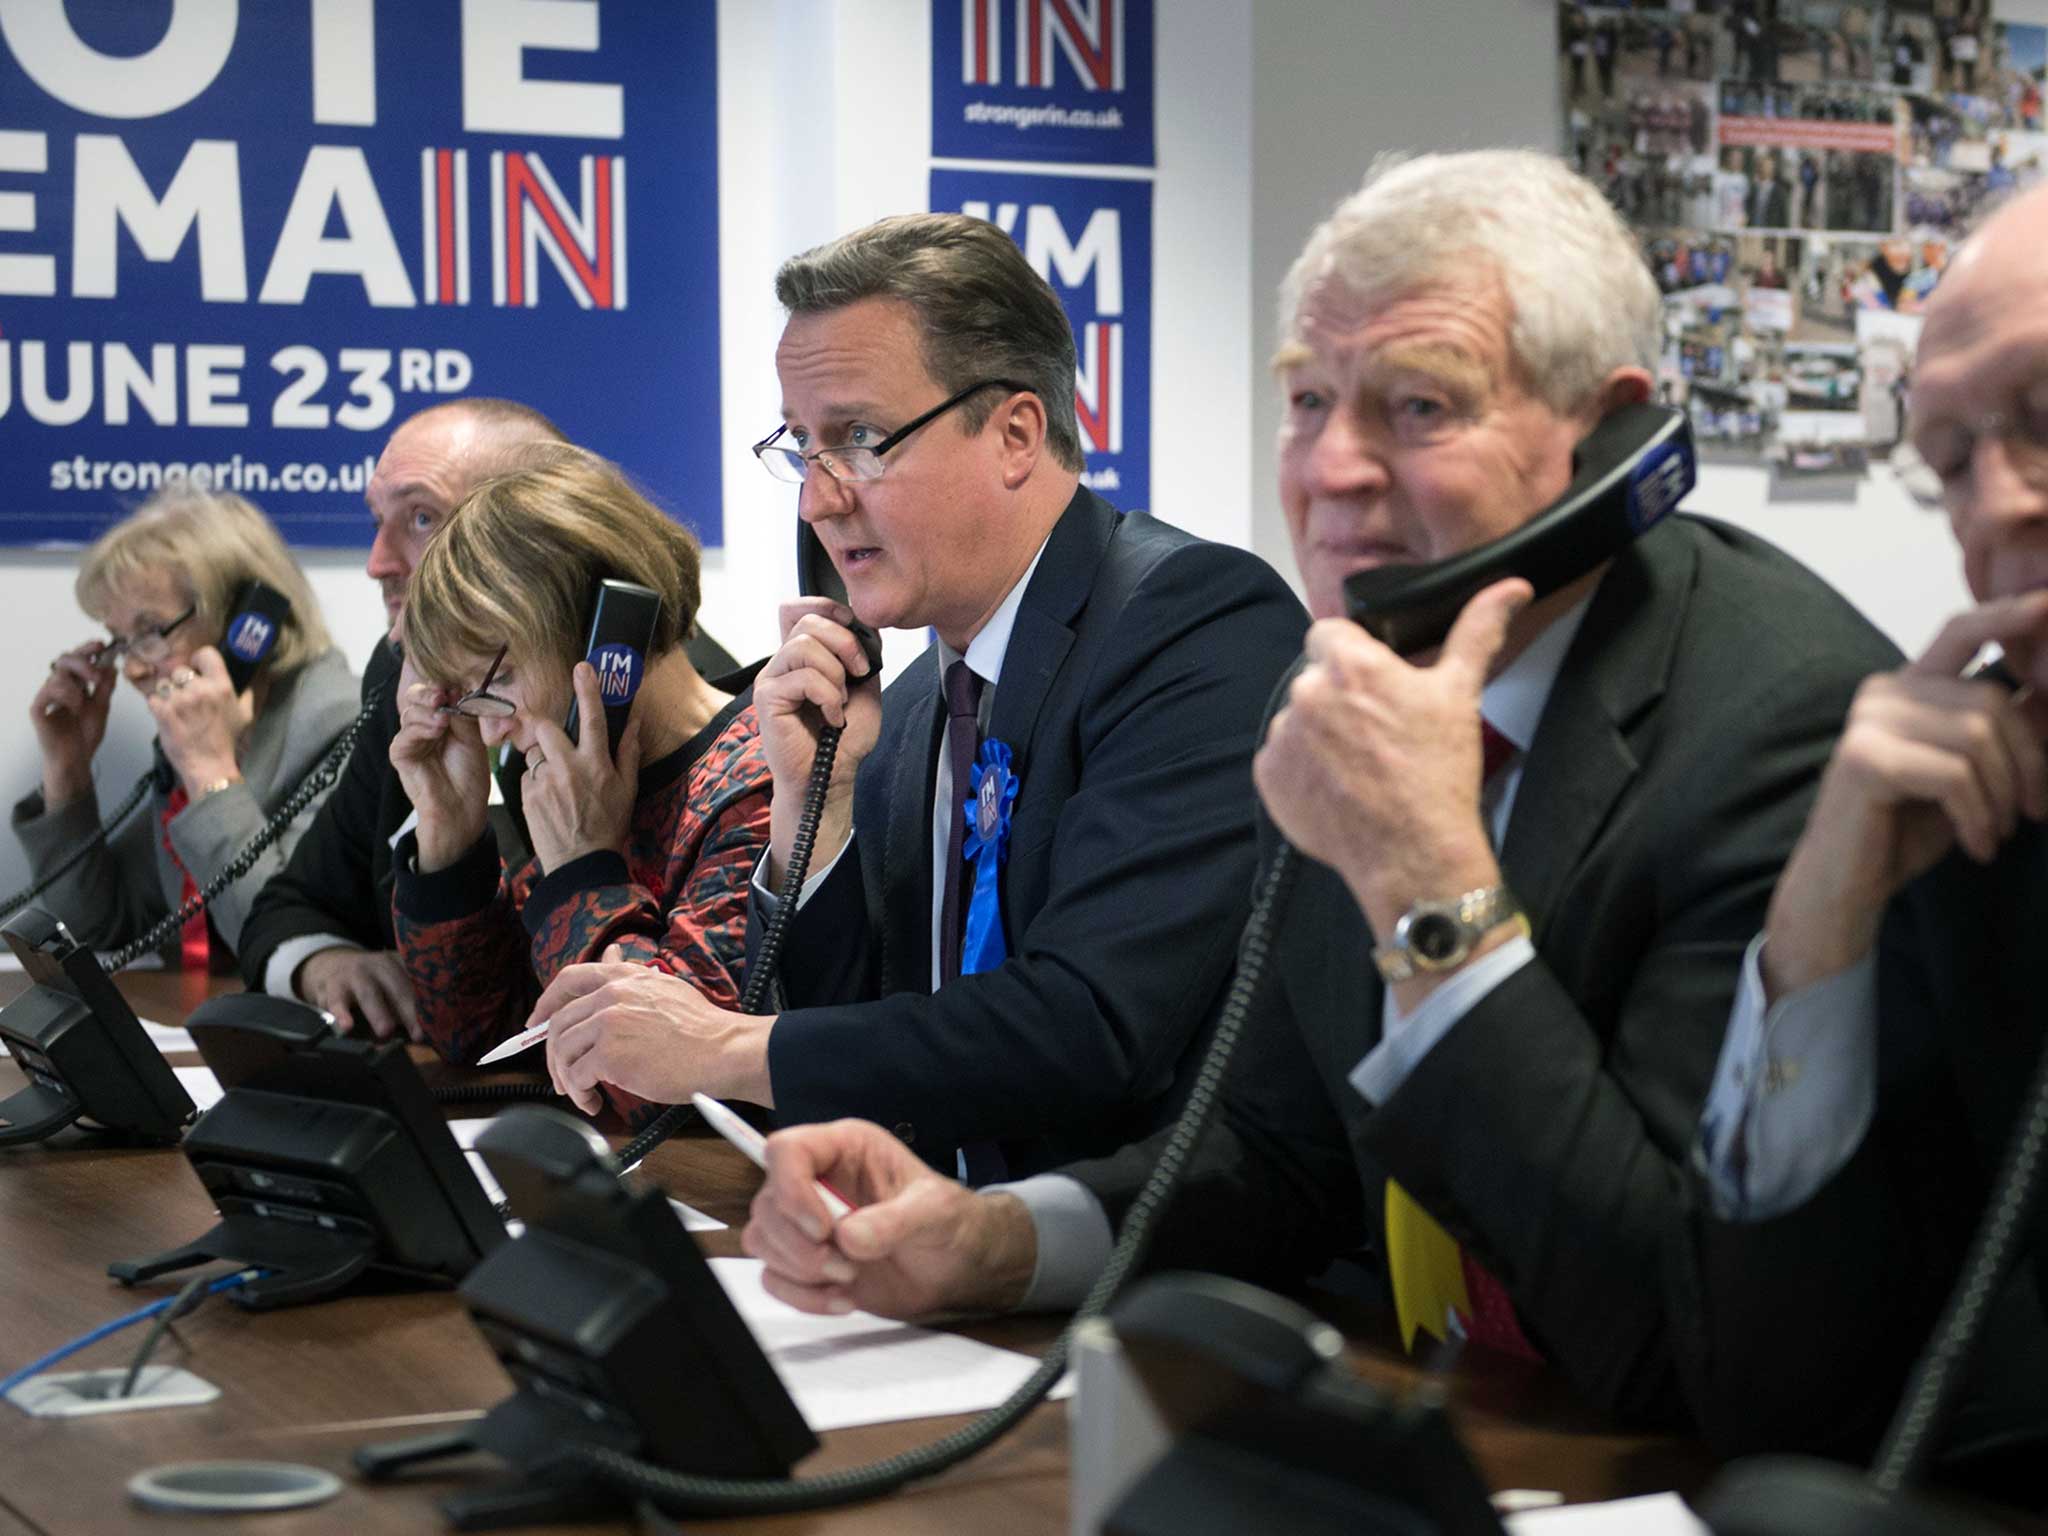 David Cameron helps to campaign for a 'Remain' vote in the forthcoming EU referendum at a phone centre in London along with fellow pro EU campaigners, Lord Ashdown, Lord Kinnock and Tessa Jowell